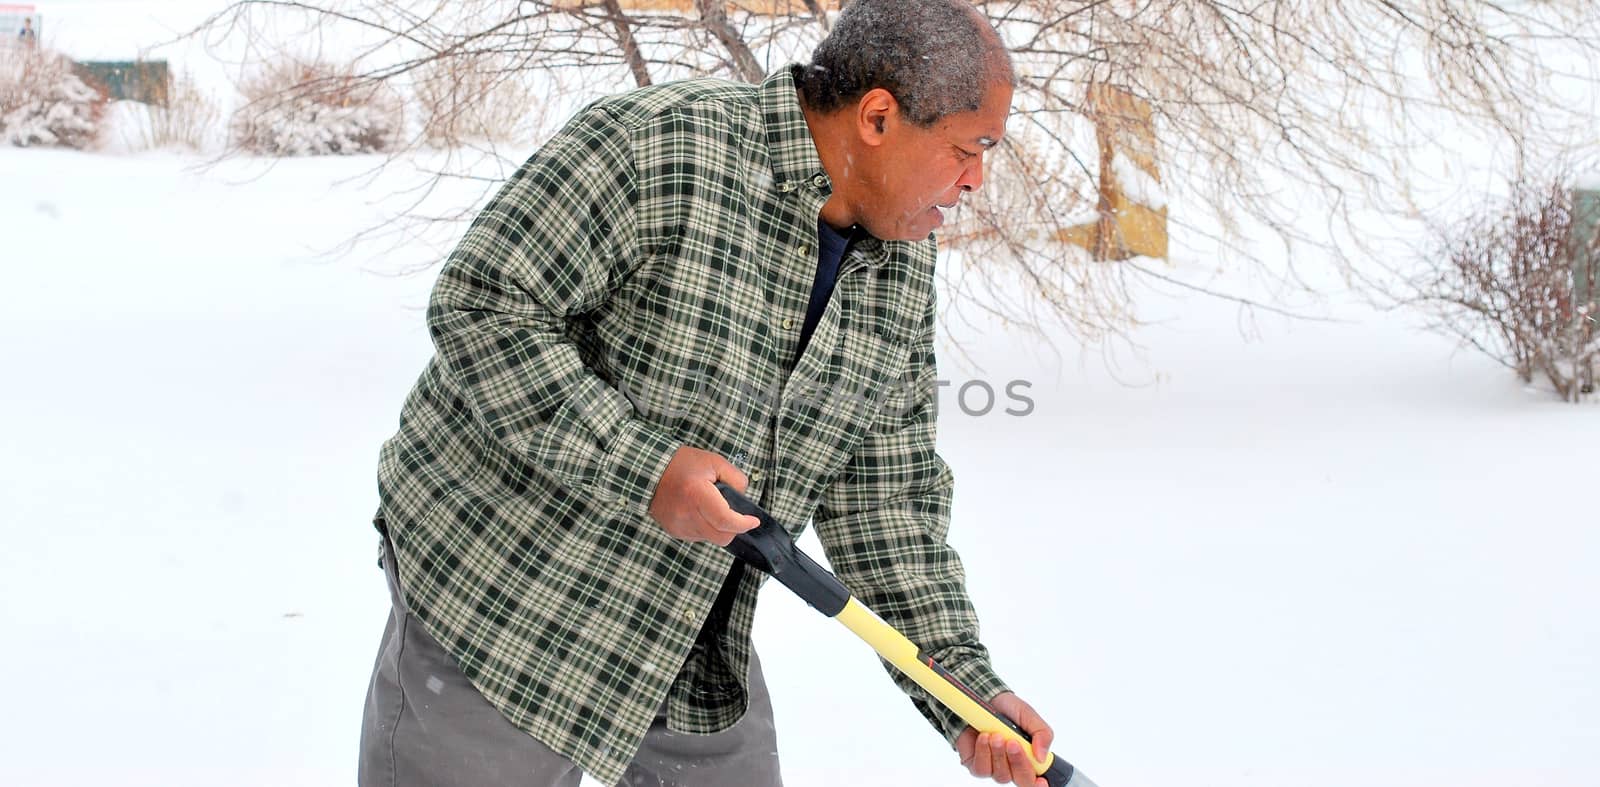 African american male in winter snow outdoors.